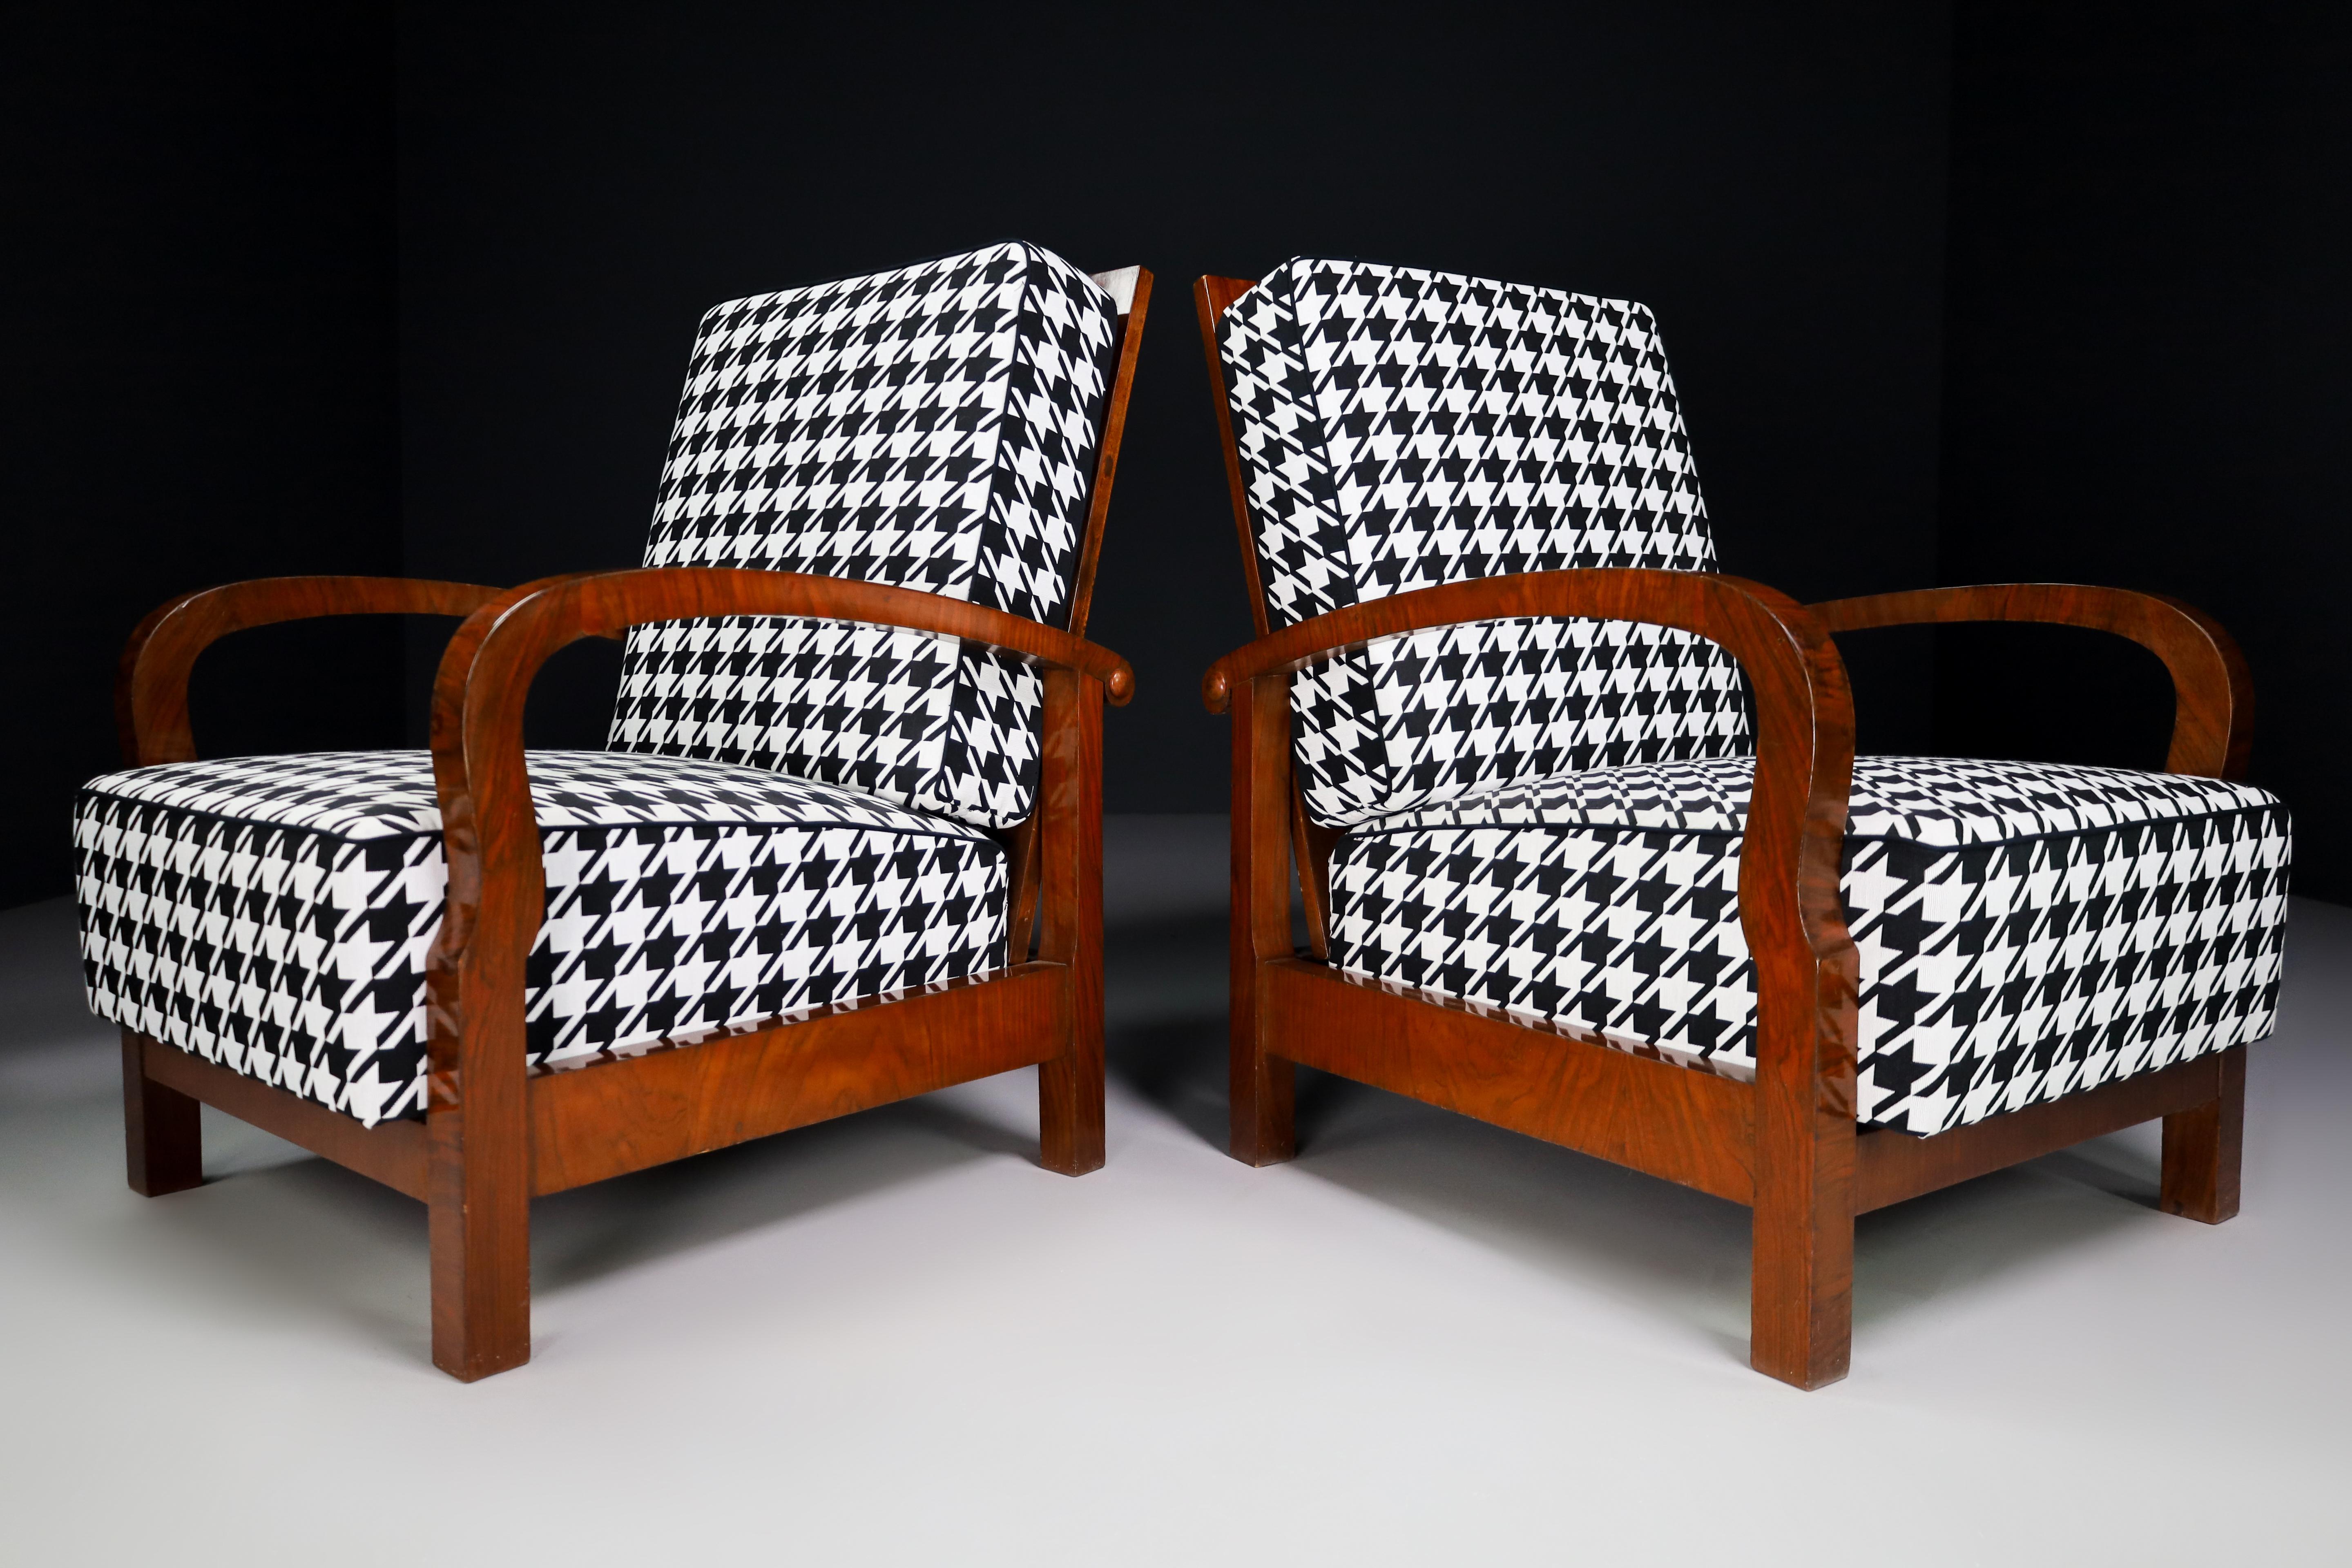 Pair of two Art Deco lounge / arm chairs, walnut Bentwood and Re-upholstered fabric, Praque 1930s. These armchairs would make an eye-catching addition to any interior such as living room, family room, screening room or even in the office. It also